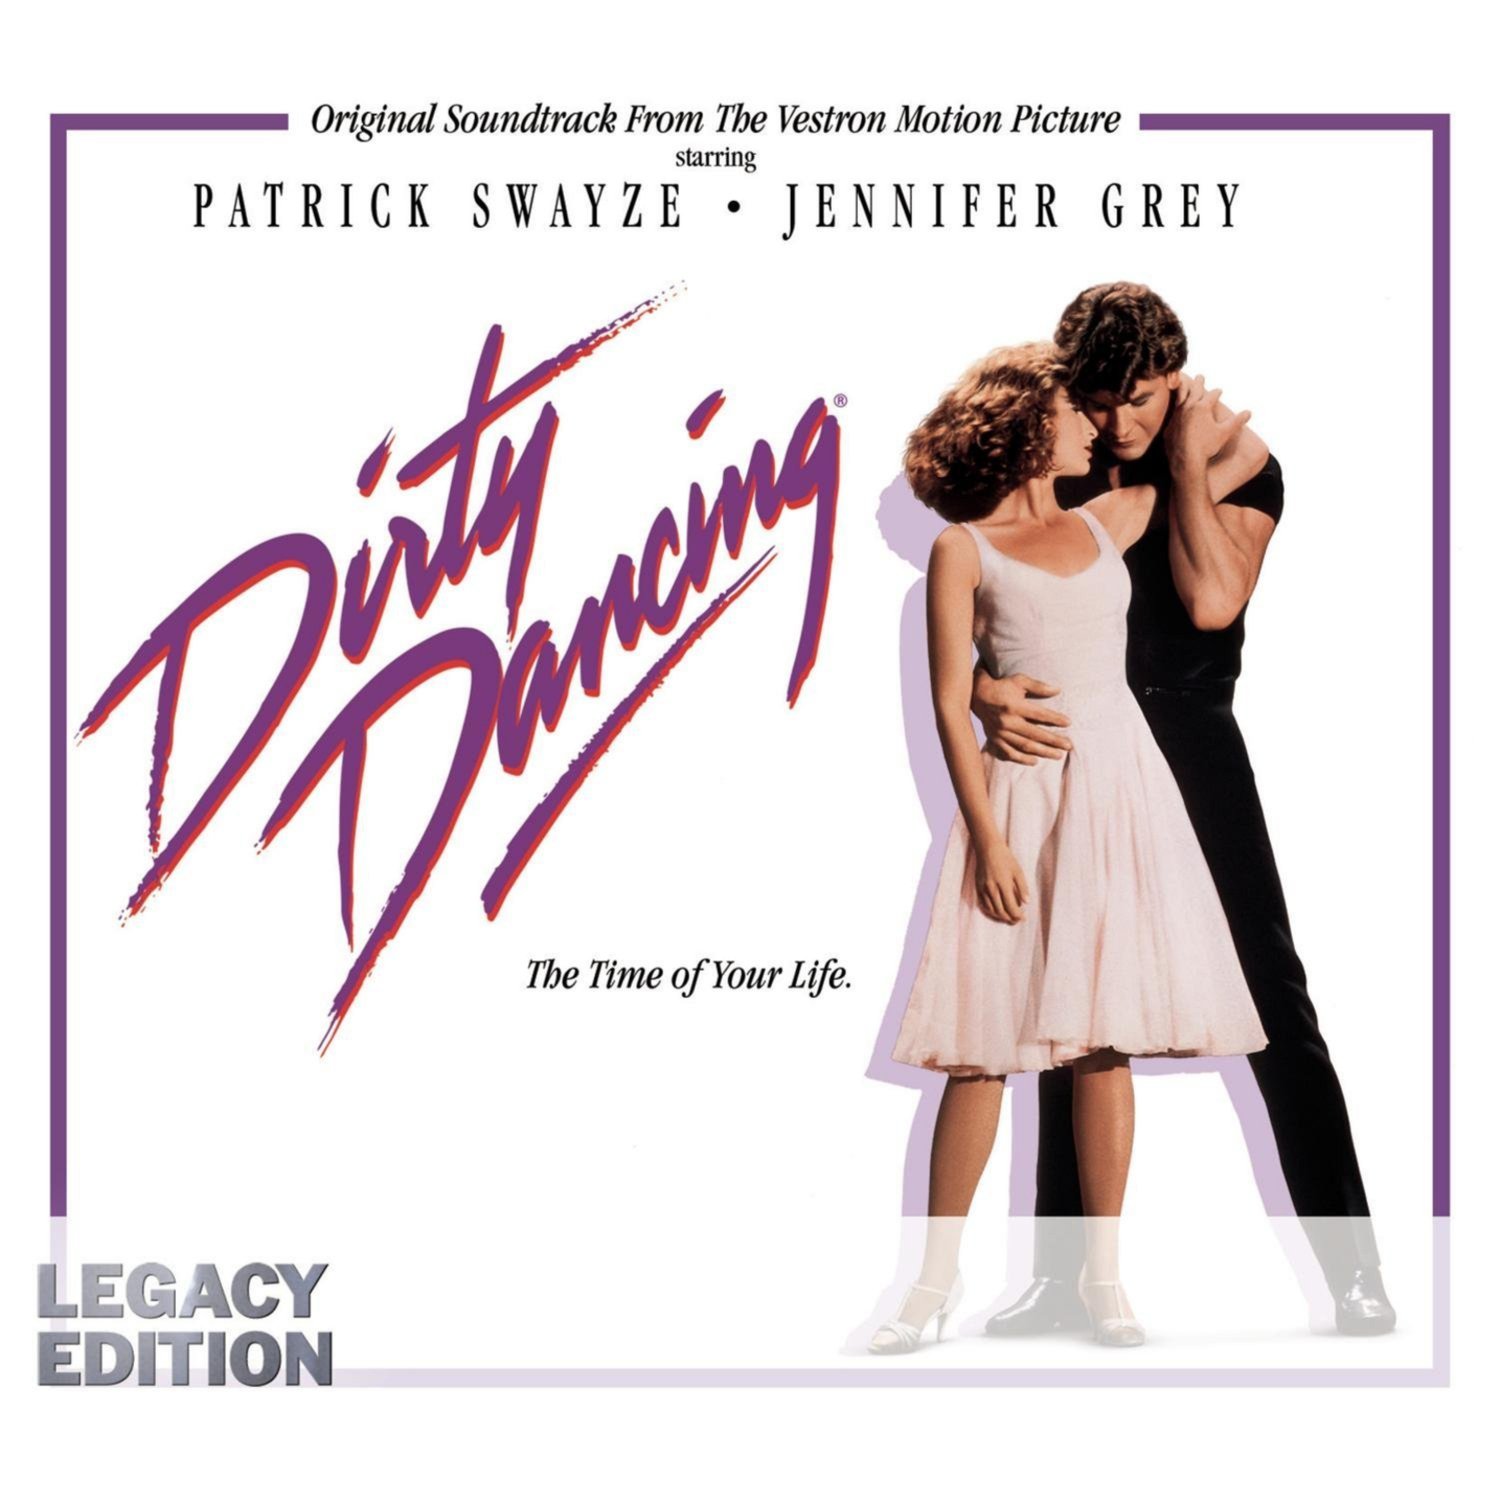 DIRTY DANCING Soundtrack BANNER Huge 4X4 Ft Fabric Poster Tapestry Flag Print movie art